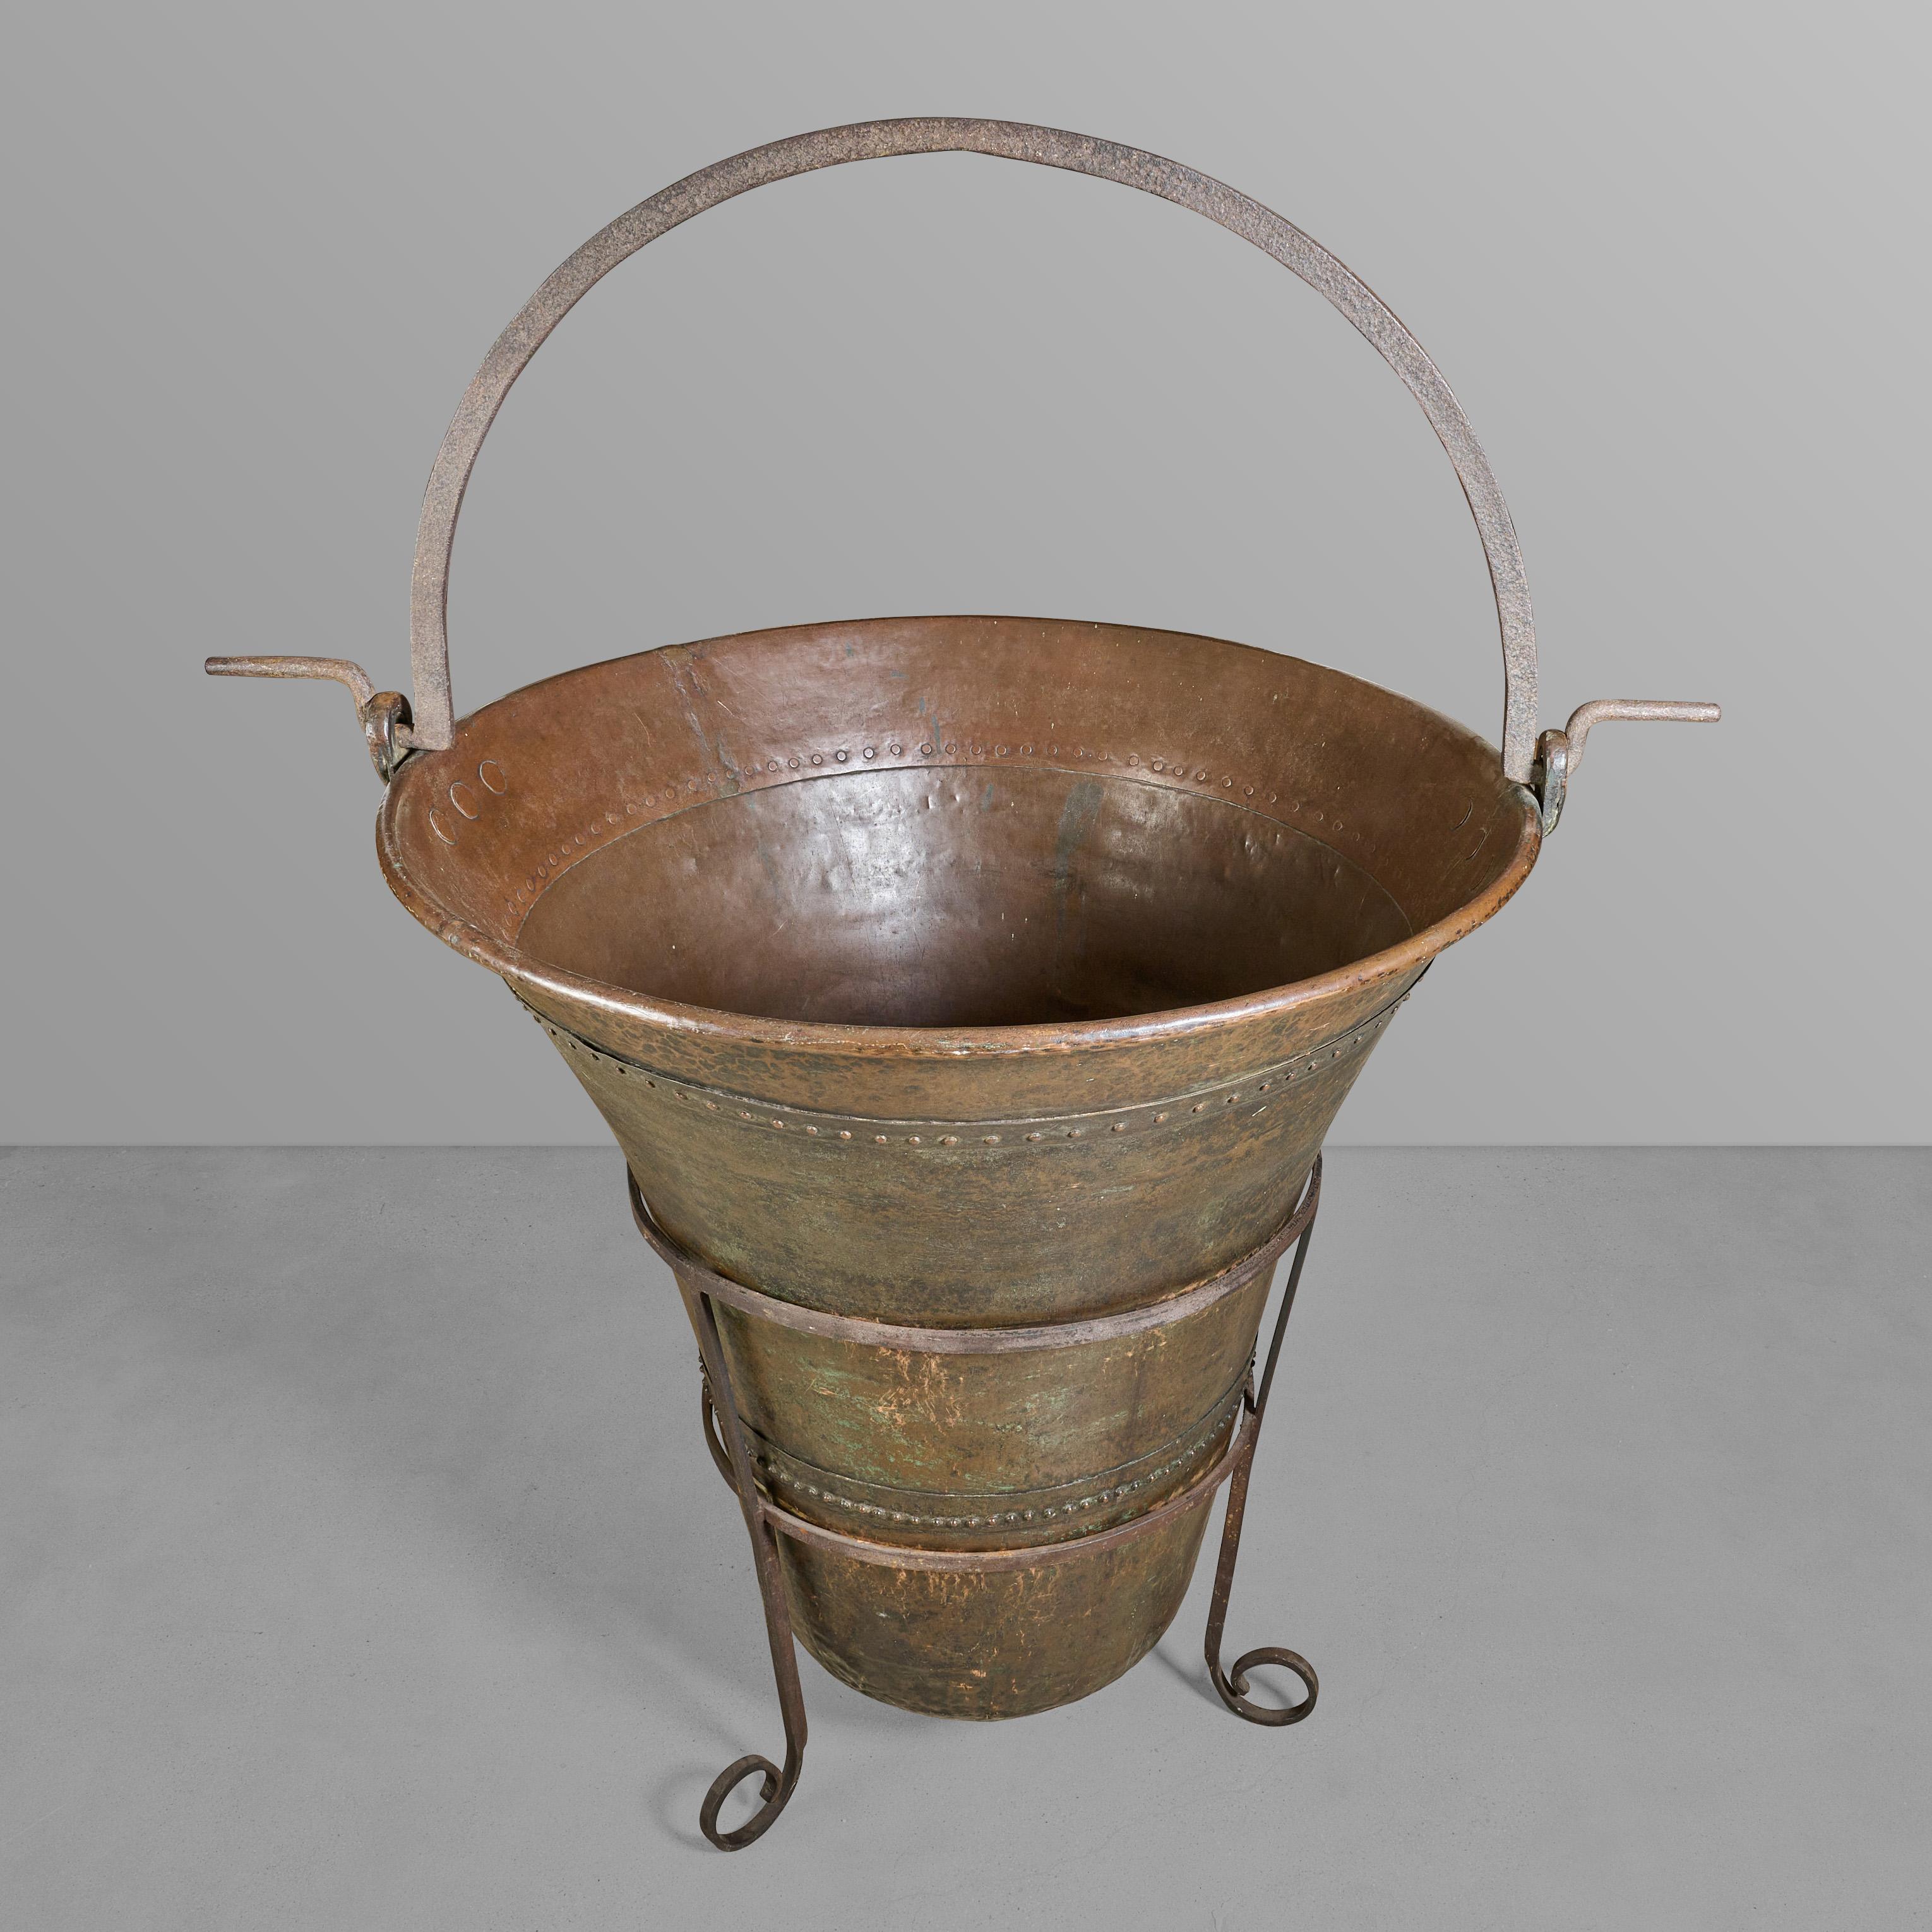 Extra large copper vessel with stand for making chocolate. Very cool rivet construction and great color.